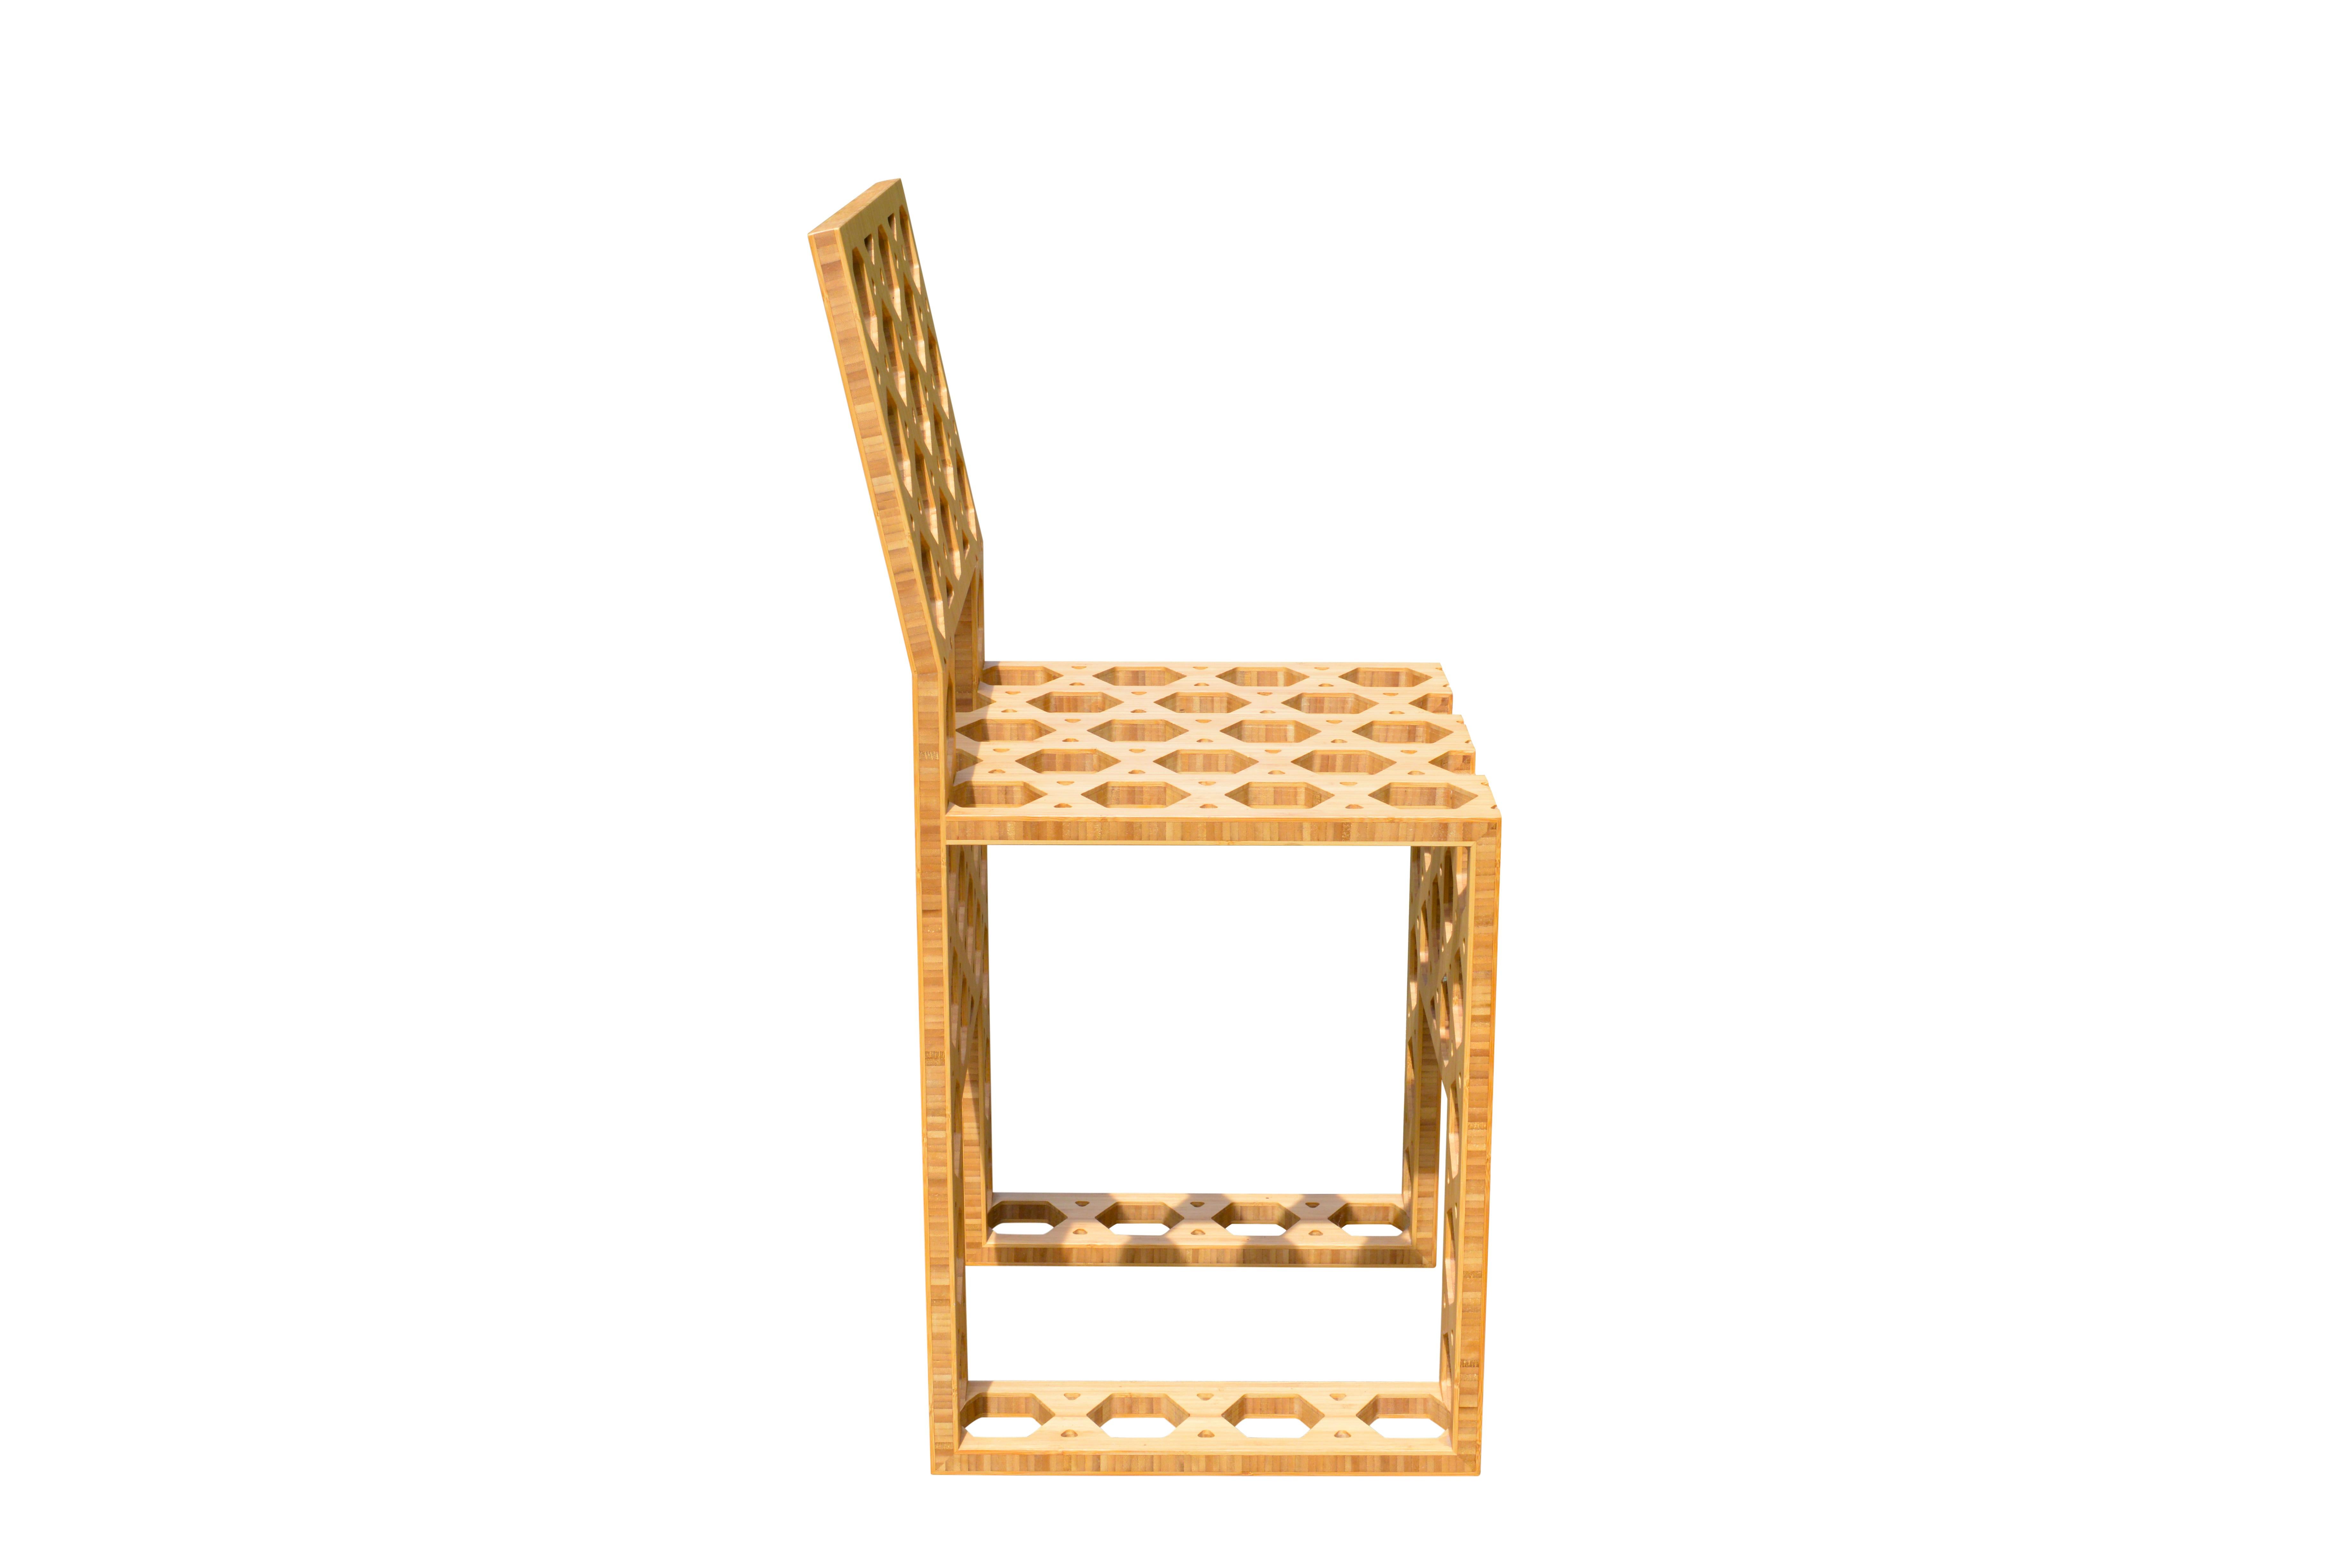 Dutch Lotte Van Laatum Kaguya-Hime Bamboo Side Chair, 2007 In Excellent Condition For Sale In Sint-Kruis, BE